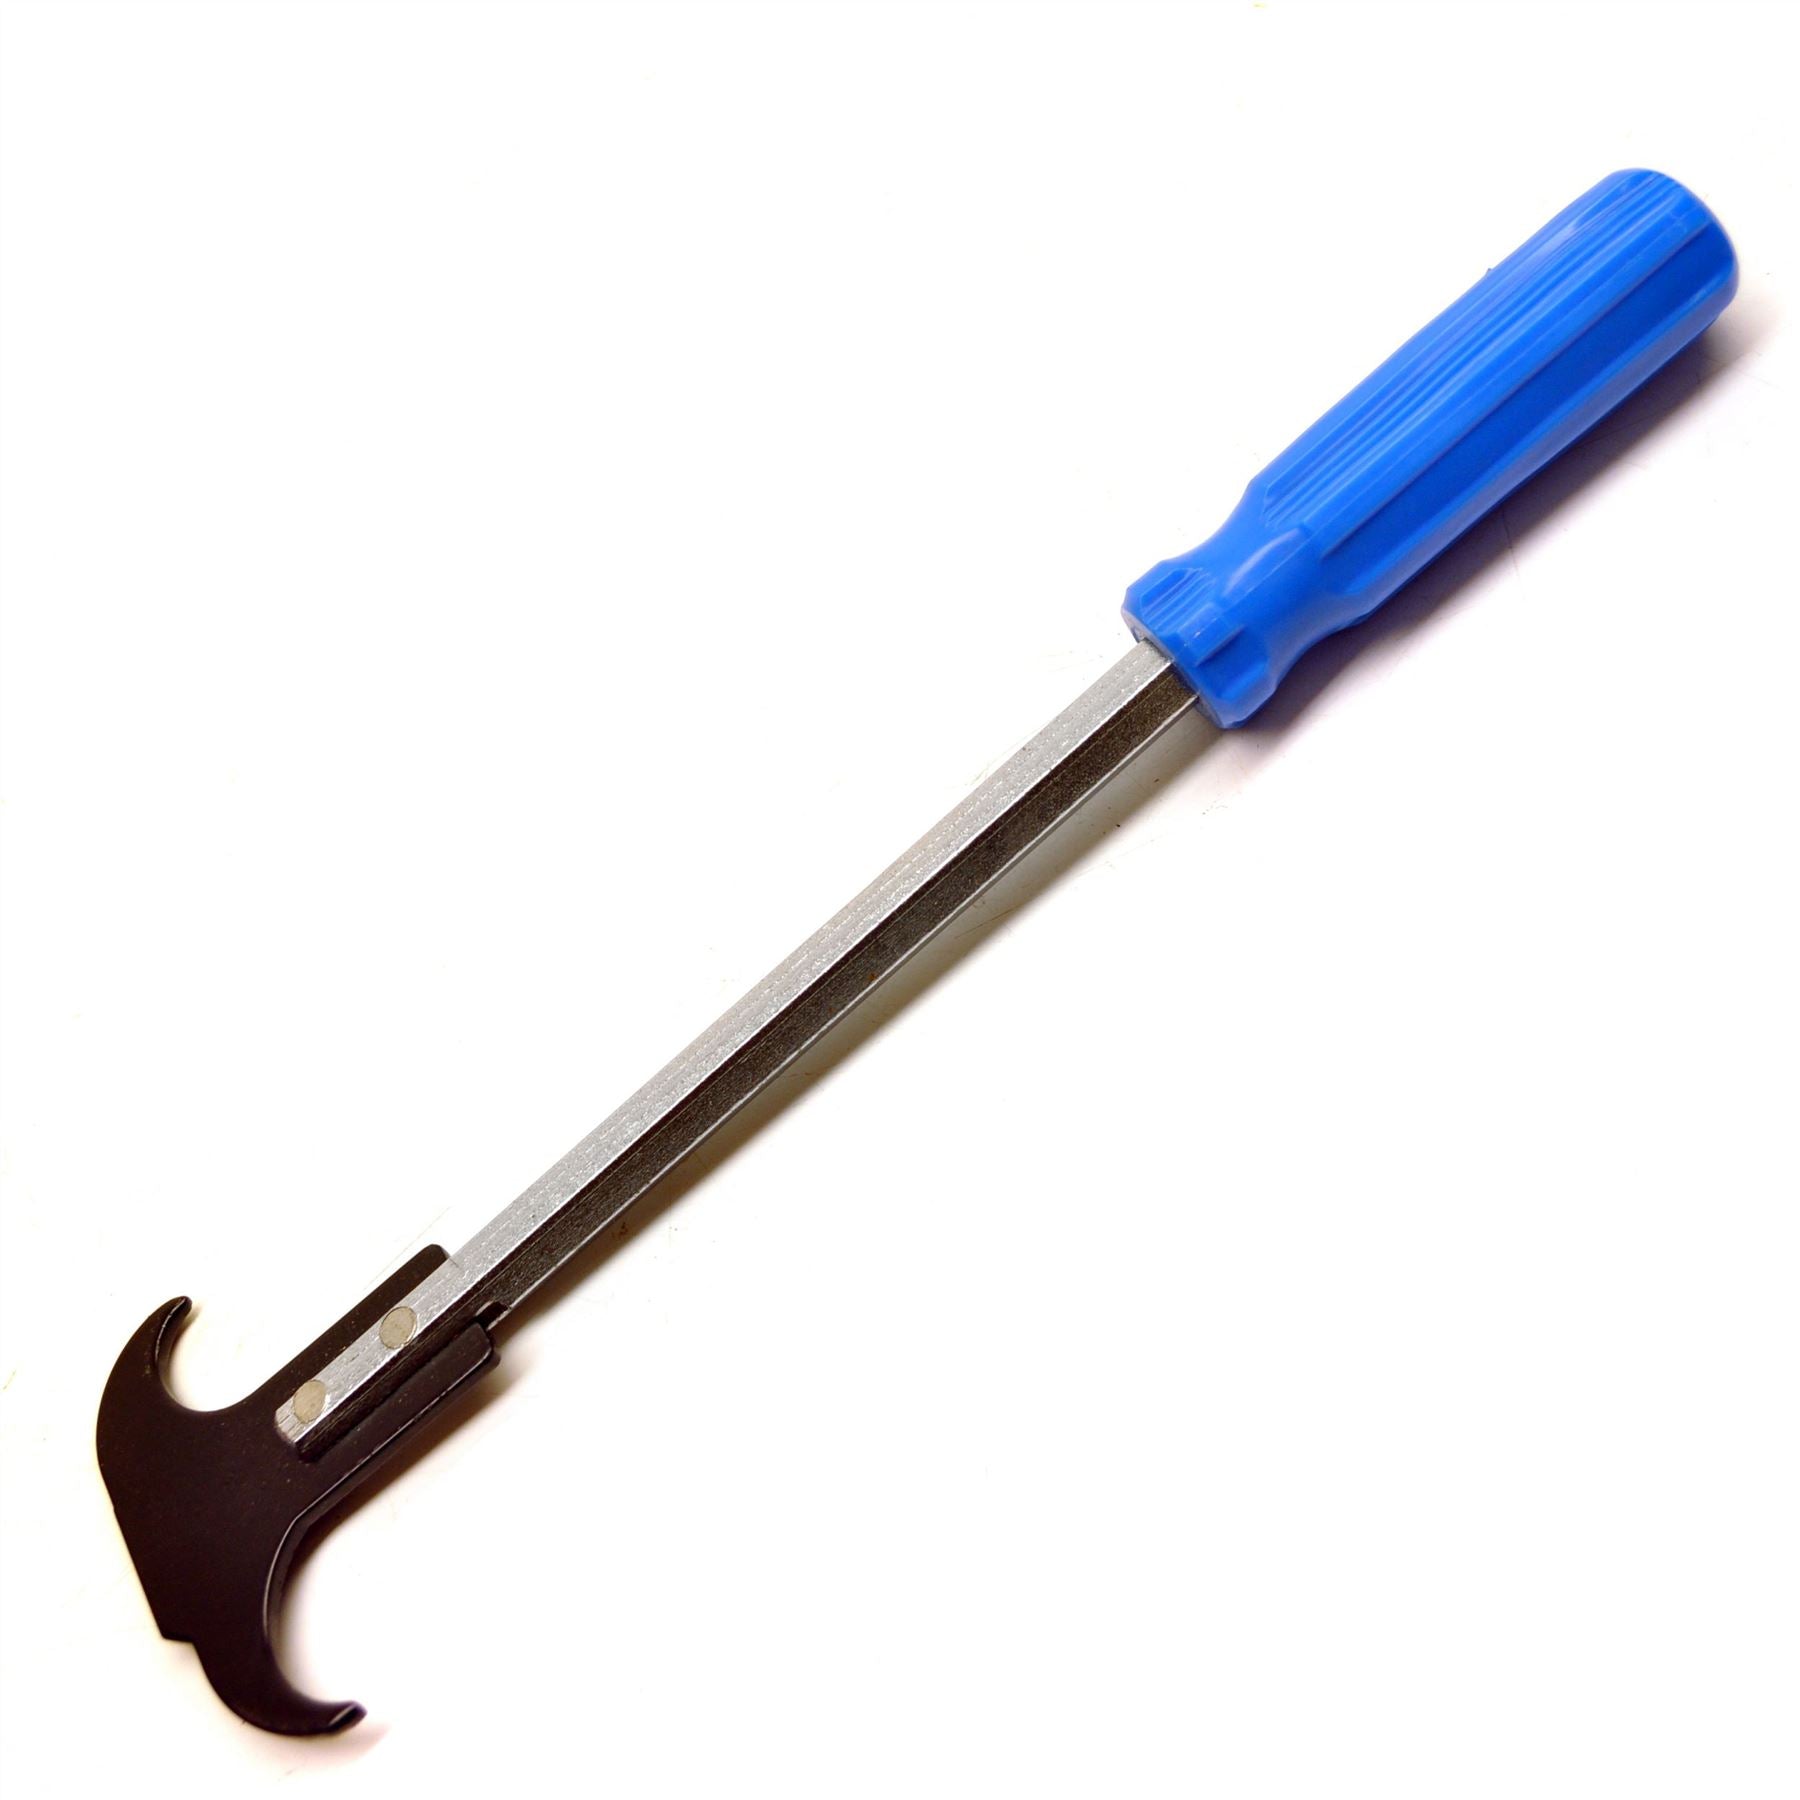 Oil Seal Puller Remover for O-Ring, Gasket, Oil and Grease Seals Sil114